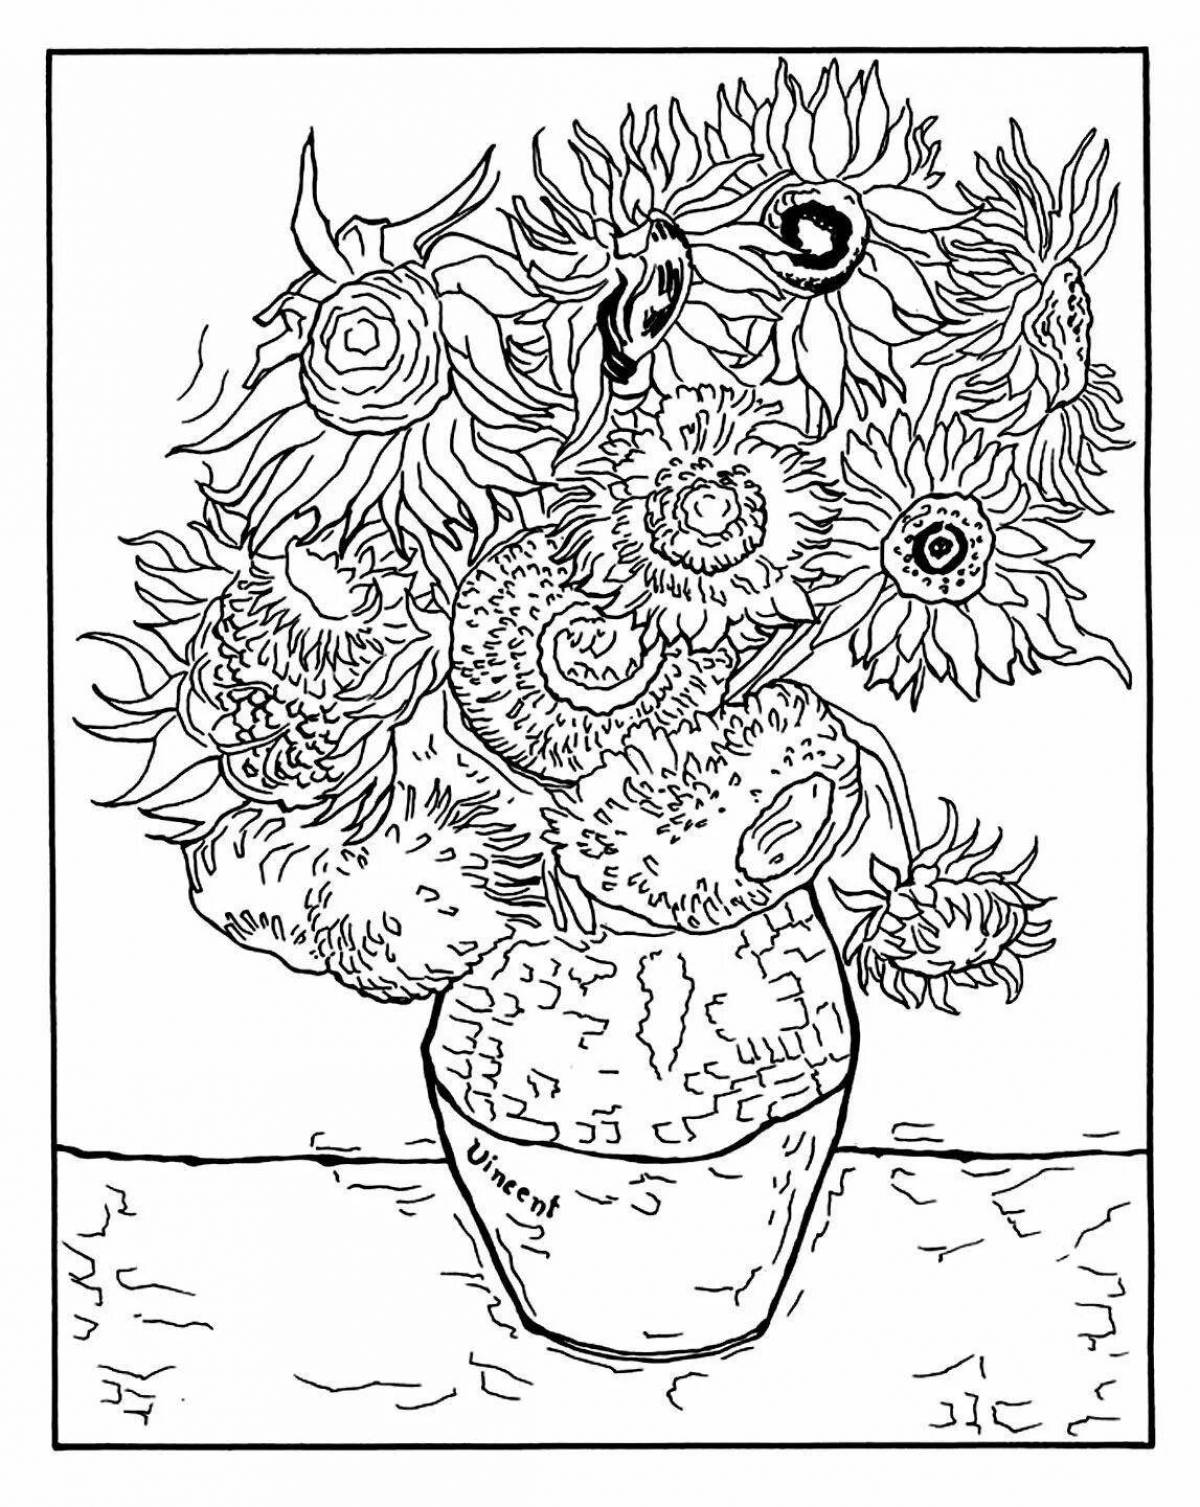 Van gogh shiny sunflowers coloring book